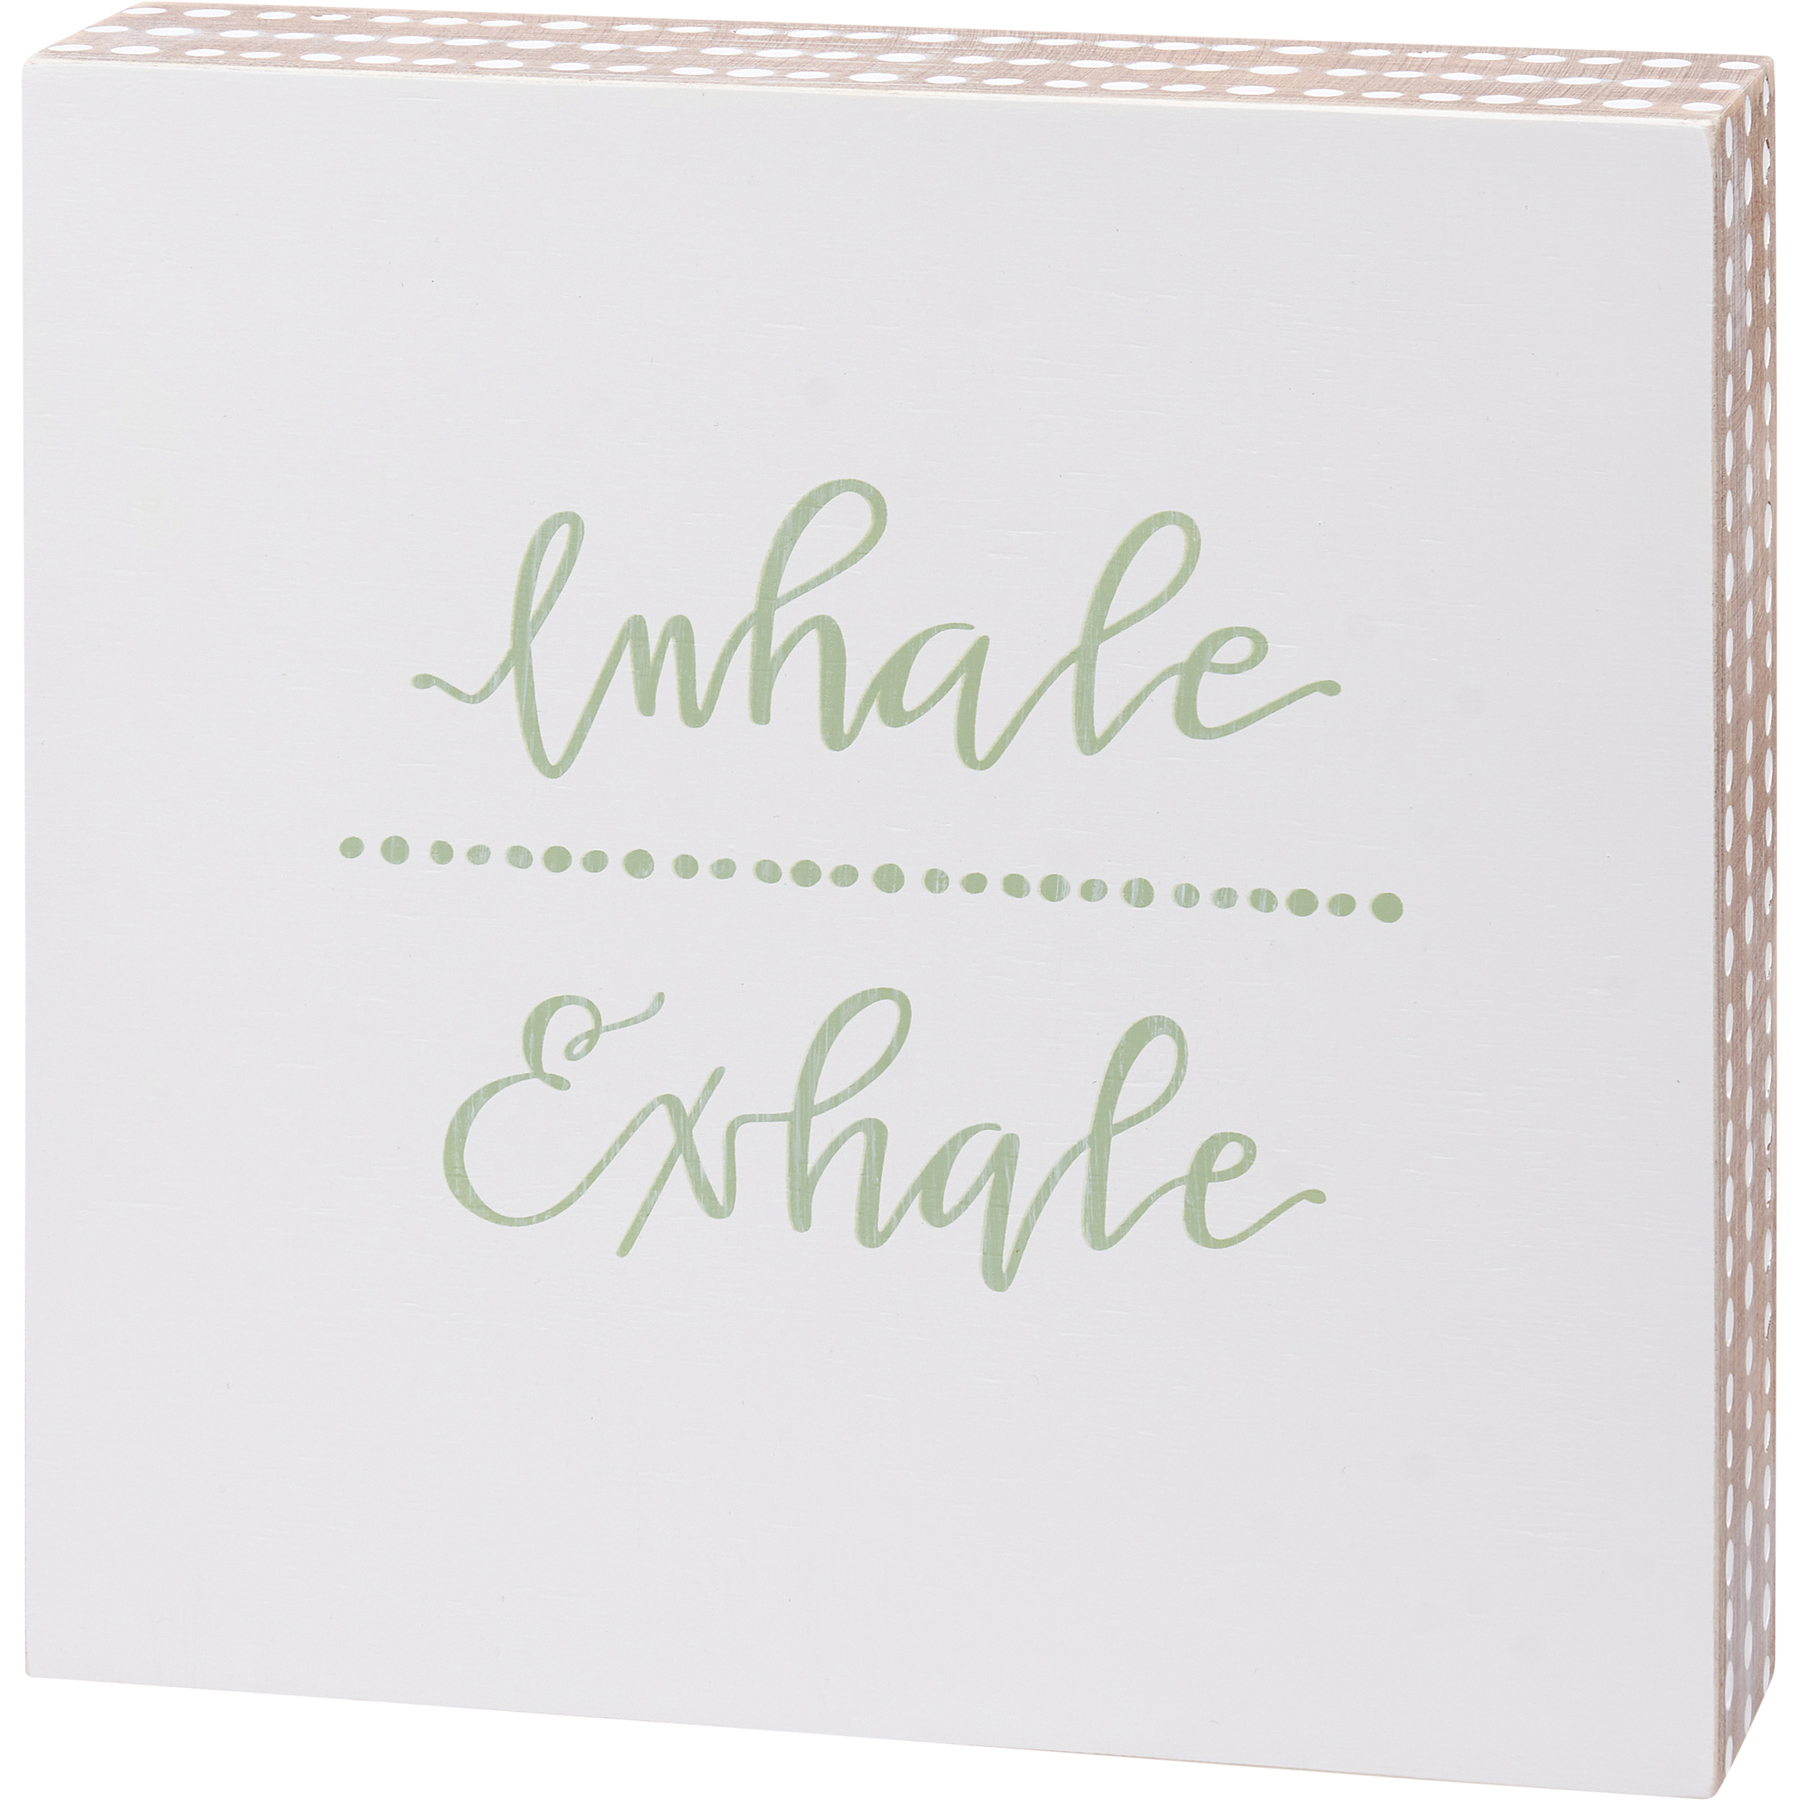 Inhale Exhale Box Sign